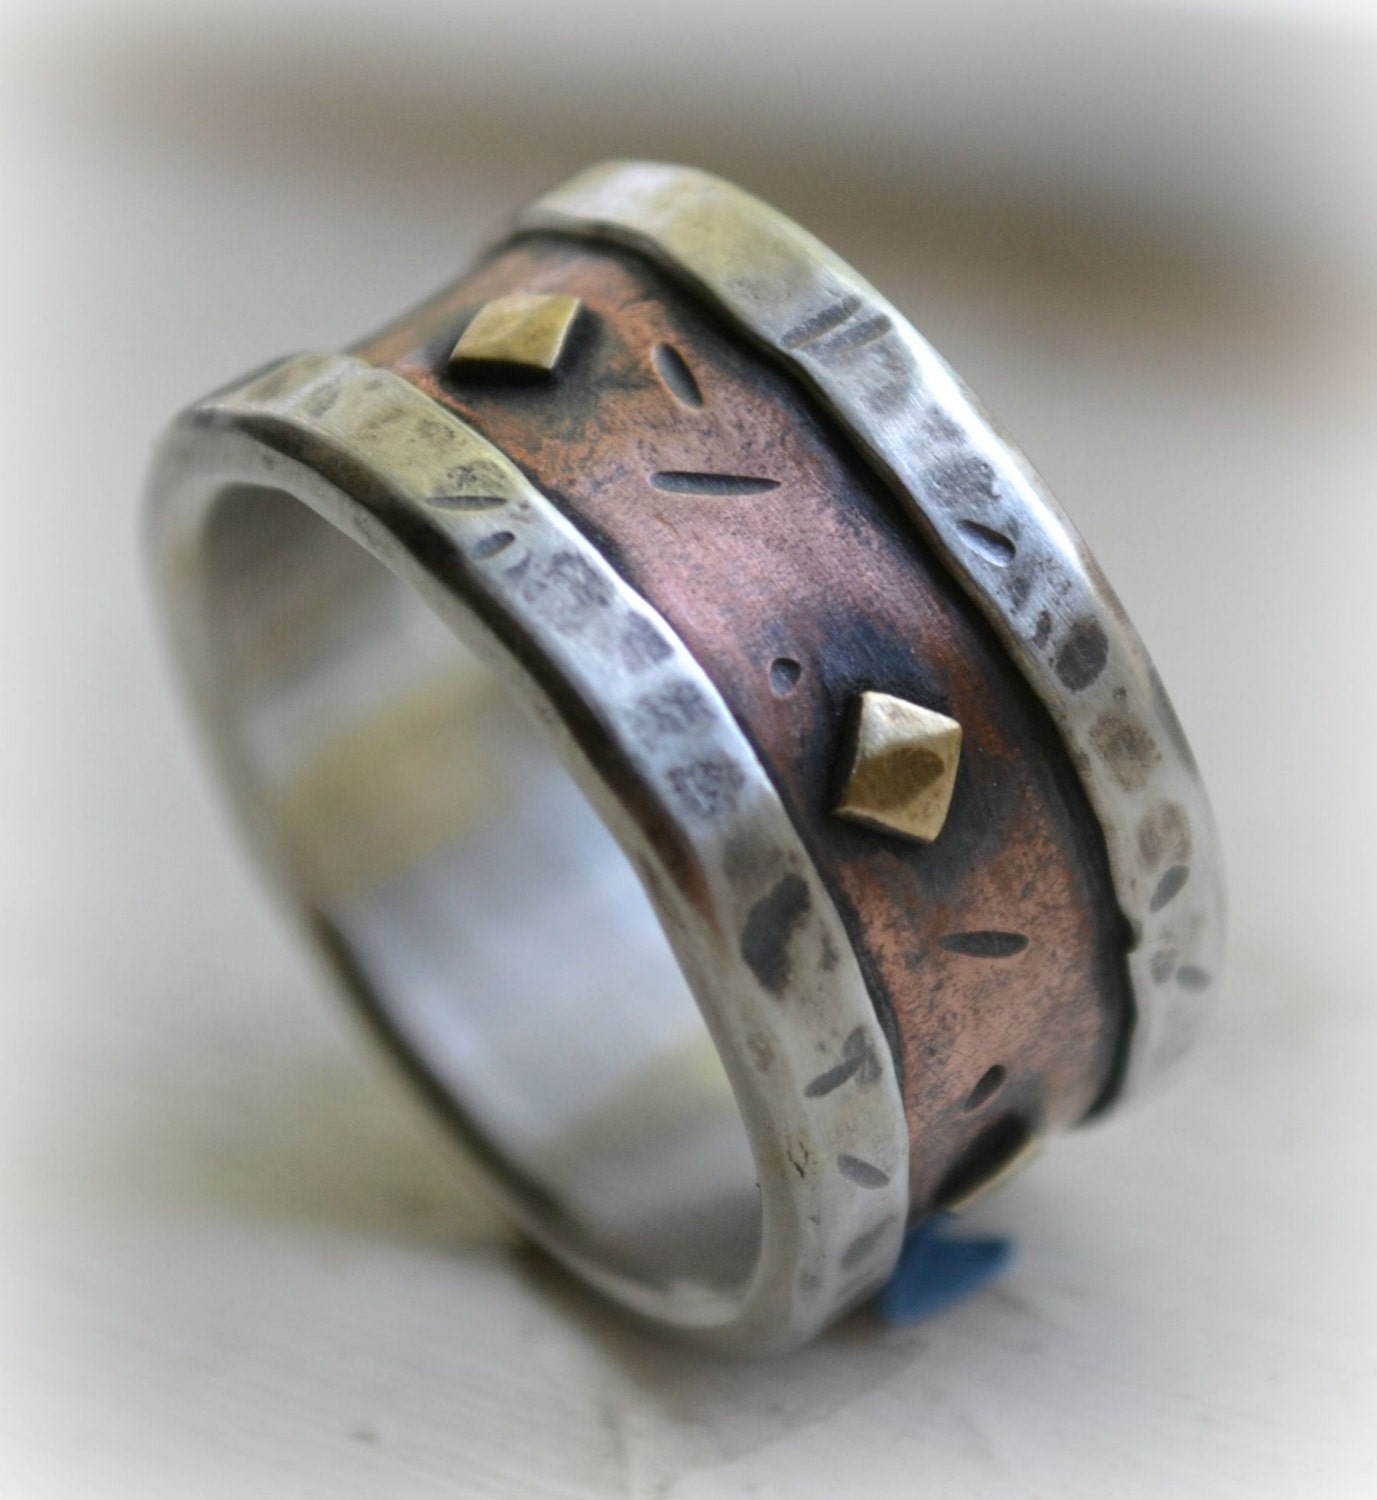 Metalsmithing Rustic Flame Colored Hand Cut and Textured Copper Flower Ring with Silver Accent Wide Band Size 7 Ring